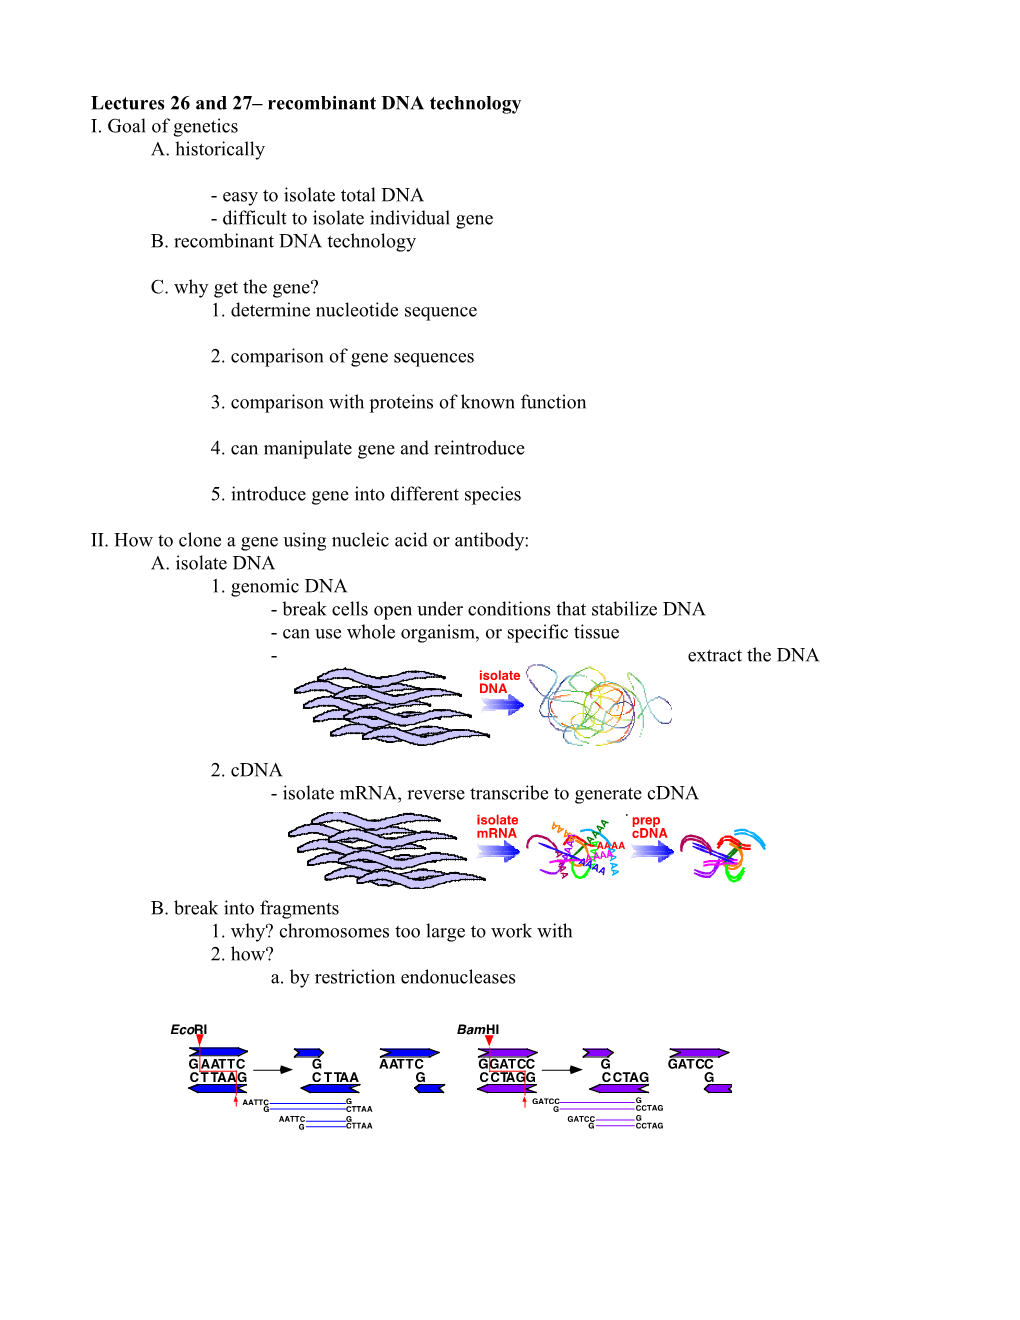 Lectures 26 and 27 Recombinant DNA Technology